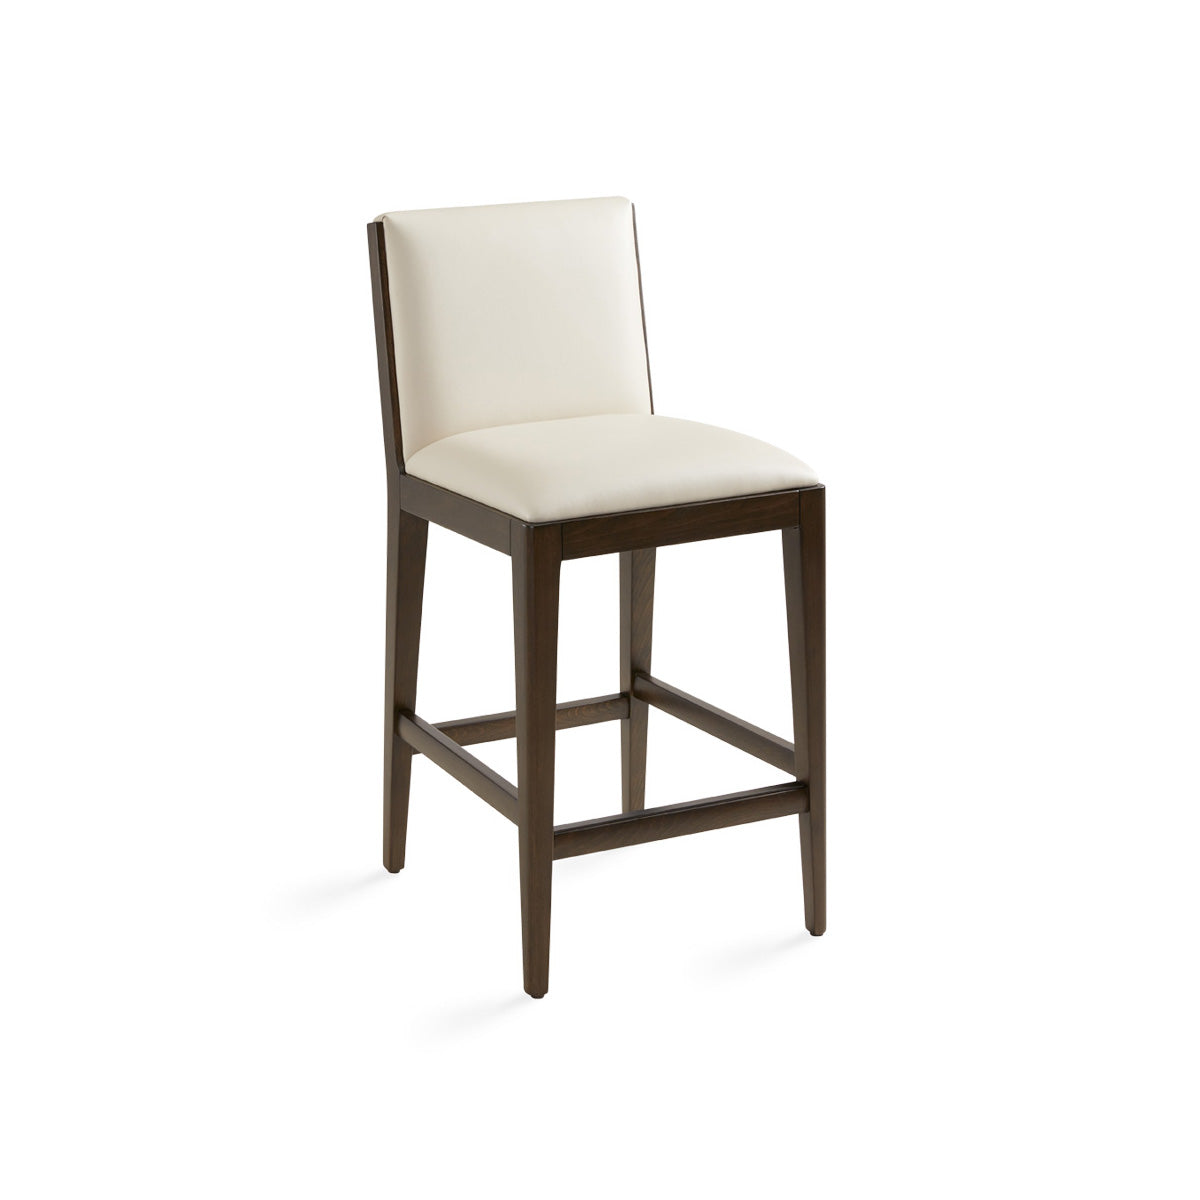 Andrei Counter Chair Aspen Taupe PU wood legs